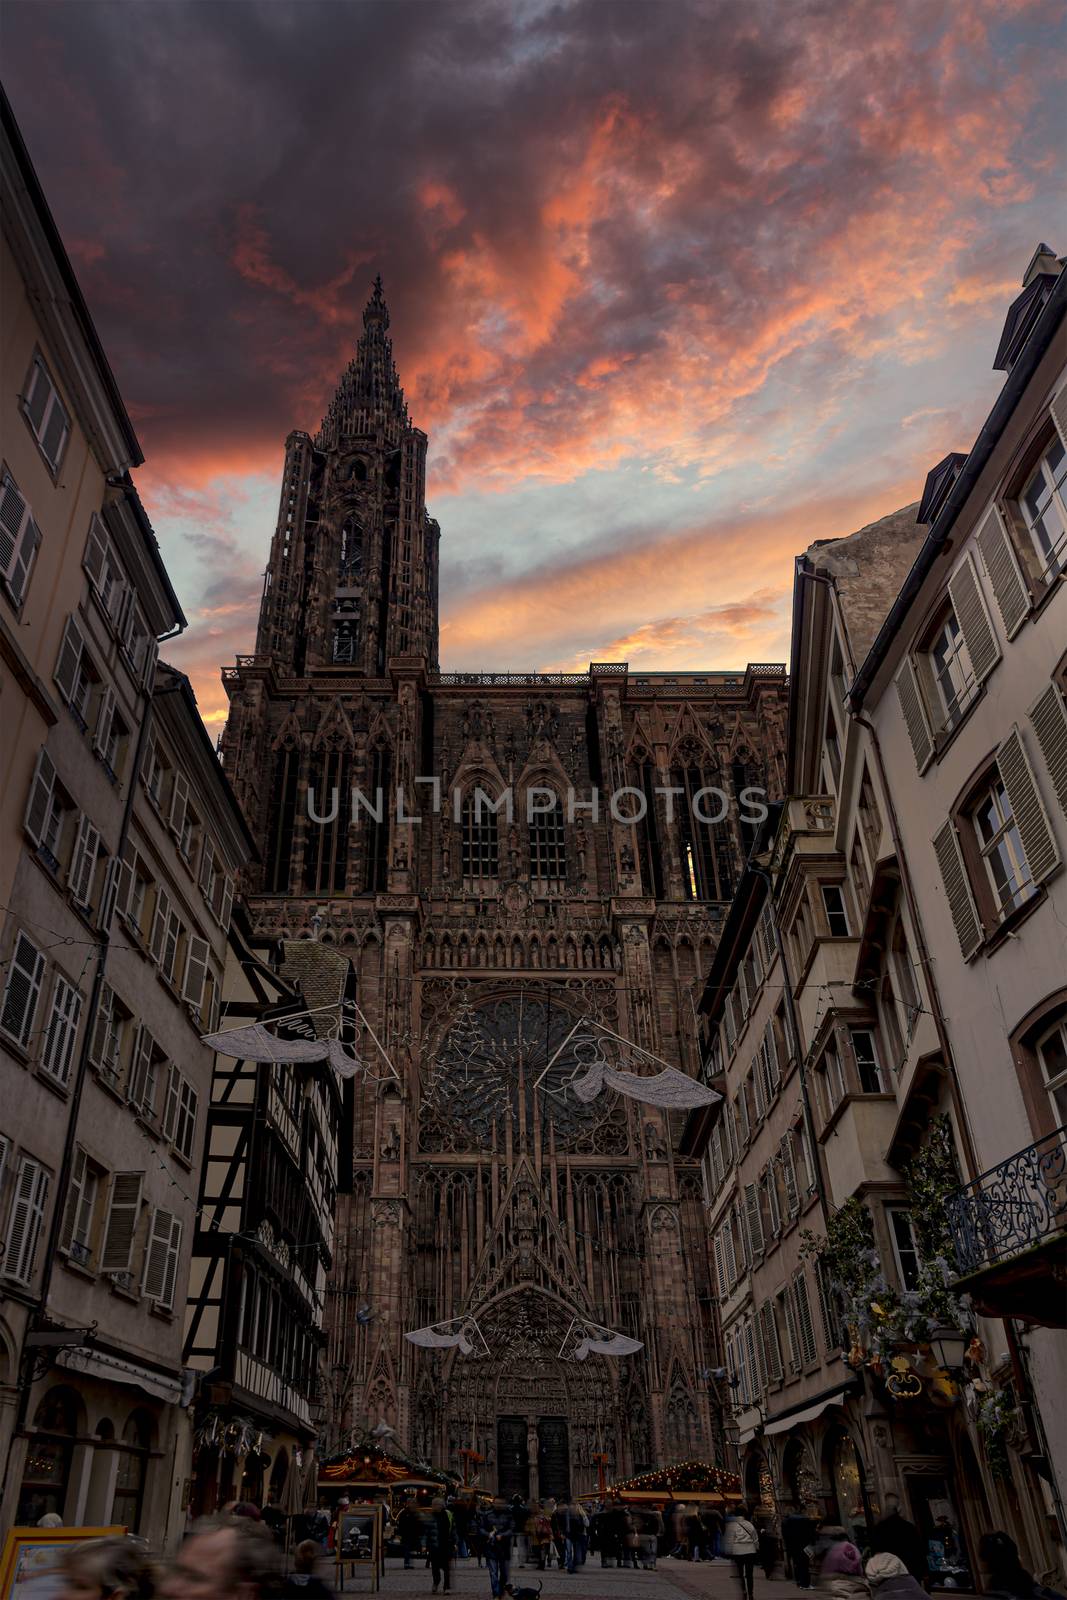 Sunset on the Strasbourg cathedral during the festive and happening Christmas season by ankorlight